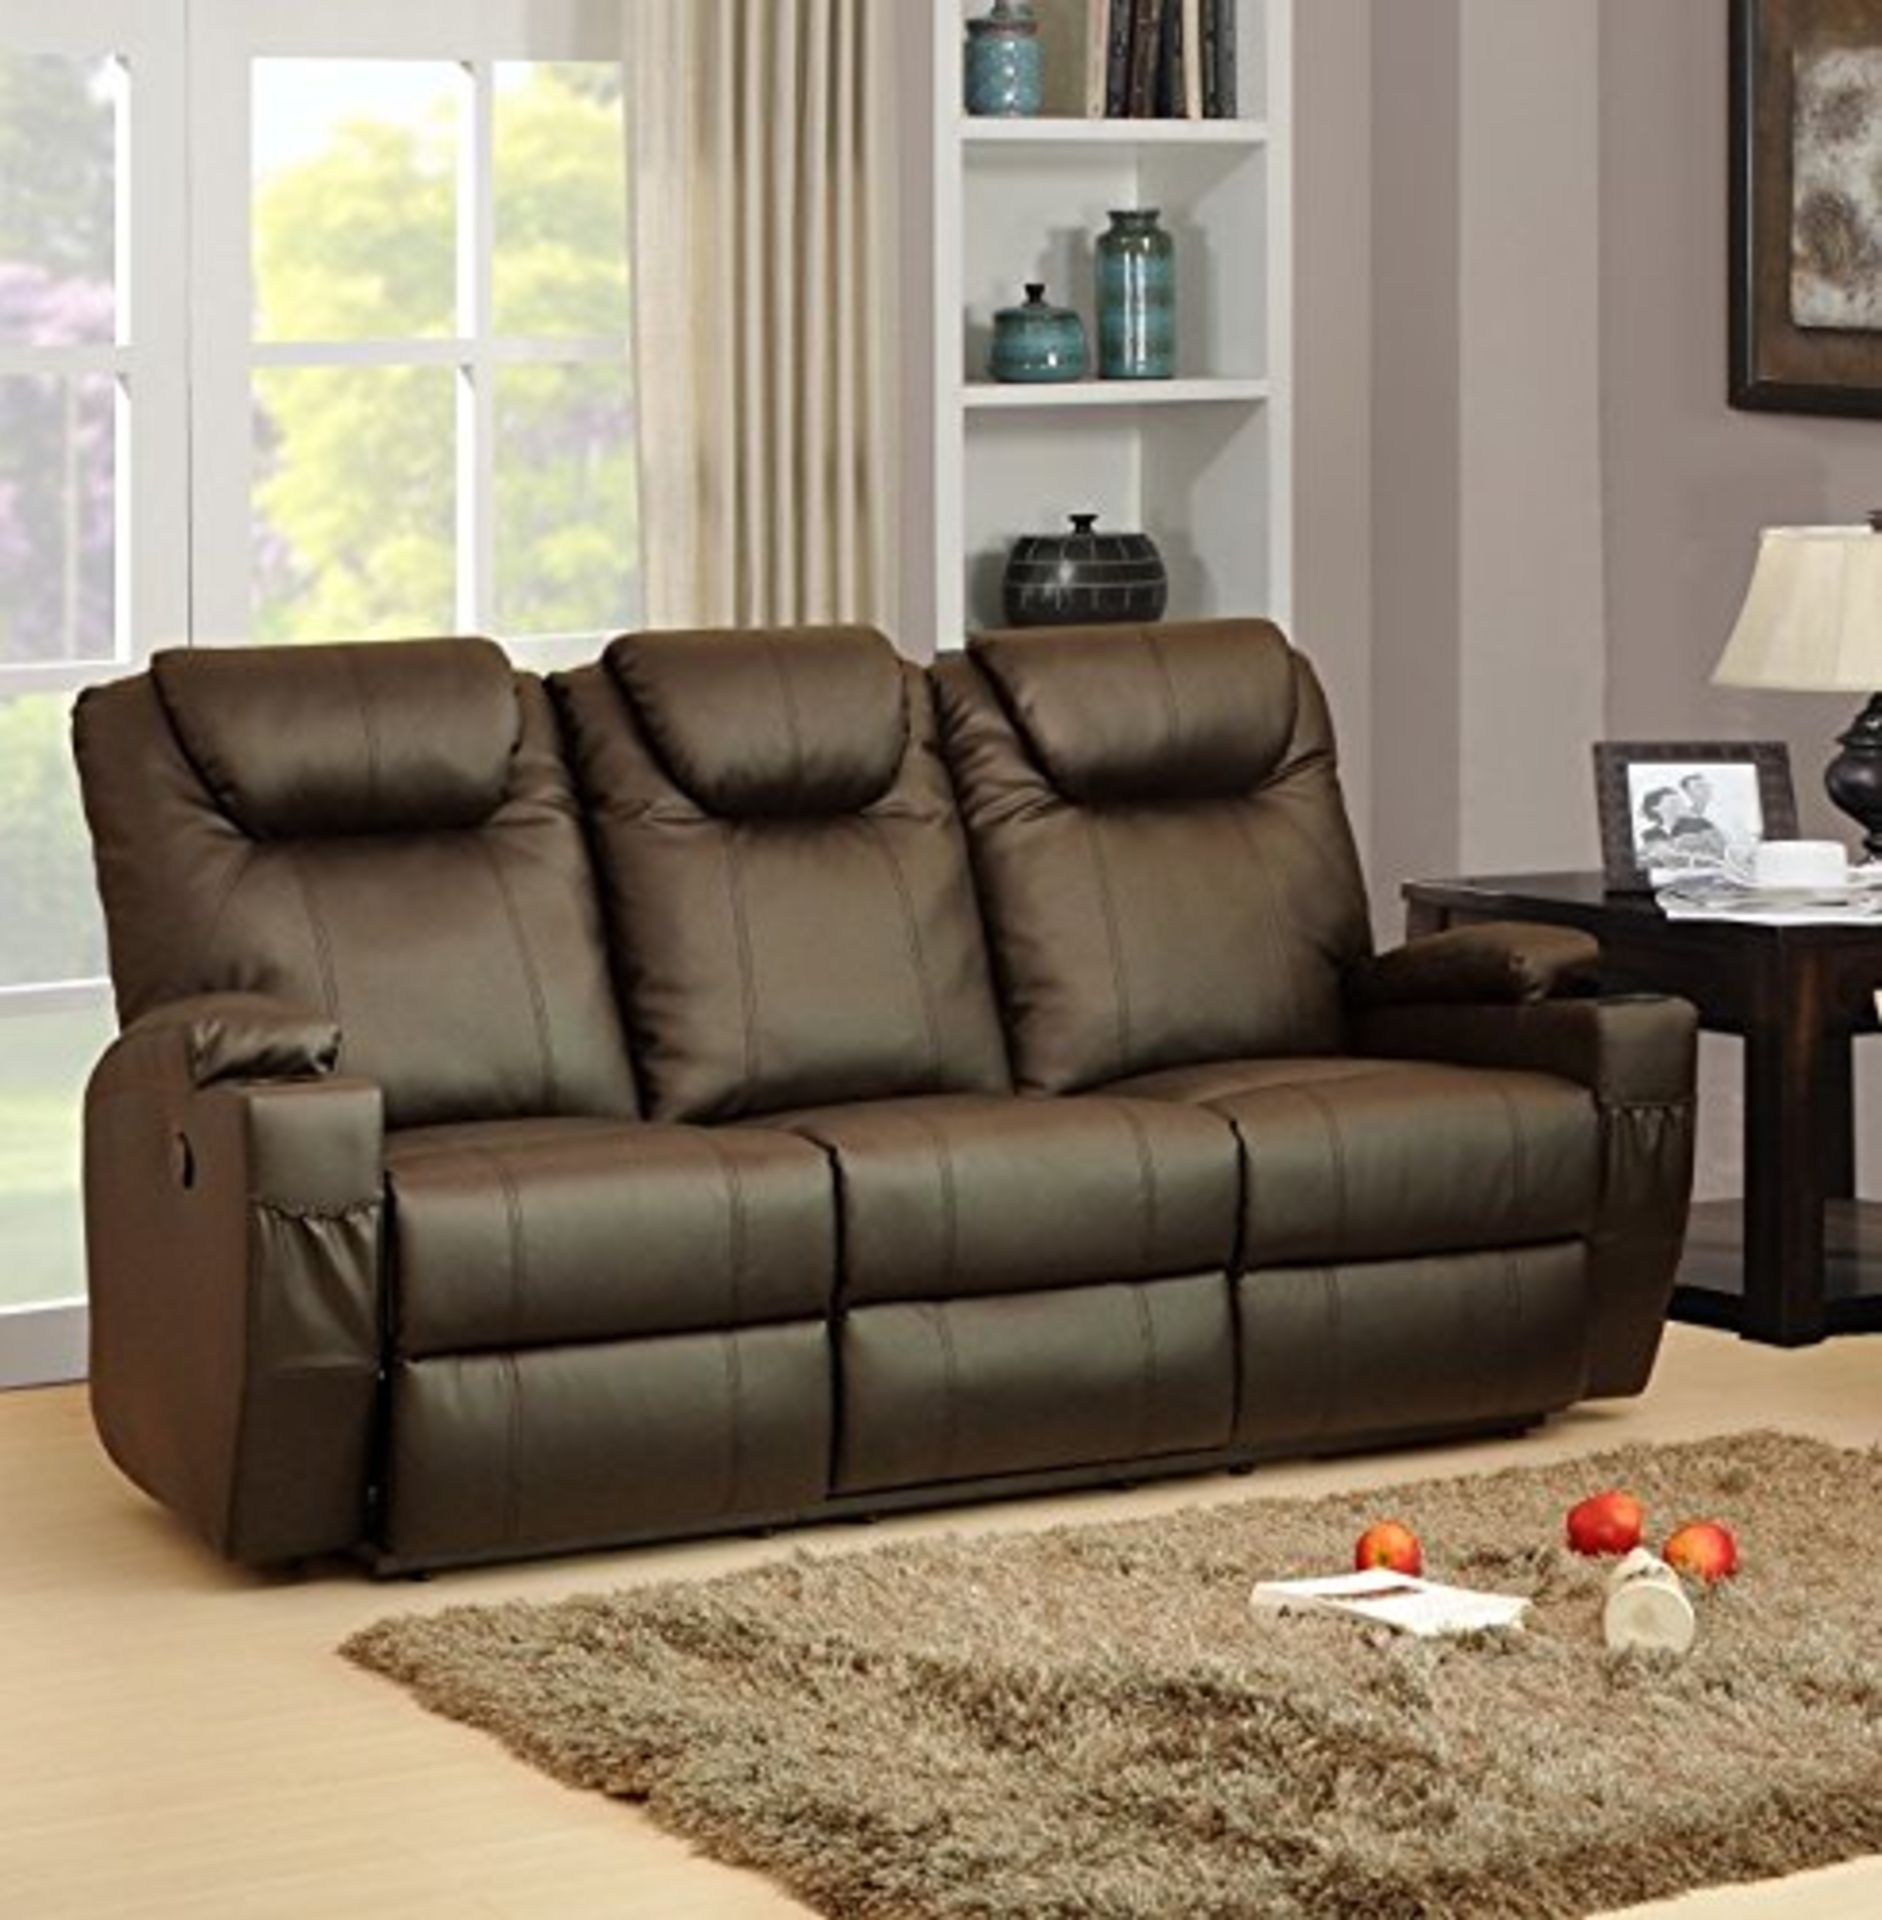 Brand New Boxed 3 Seater Plus 2 Seater Lazyboy Brown Leather Electric Reclining Sofas - Bild 2 aus 2